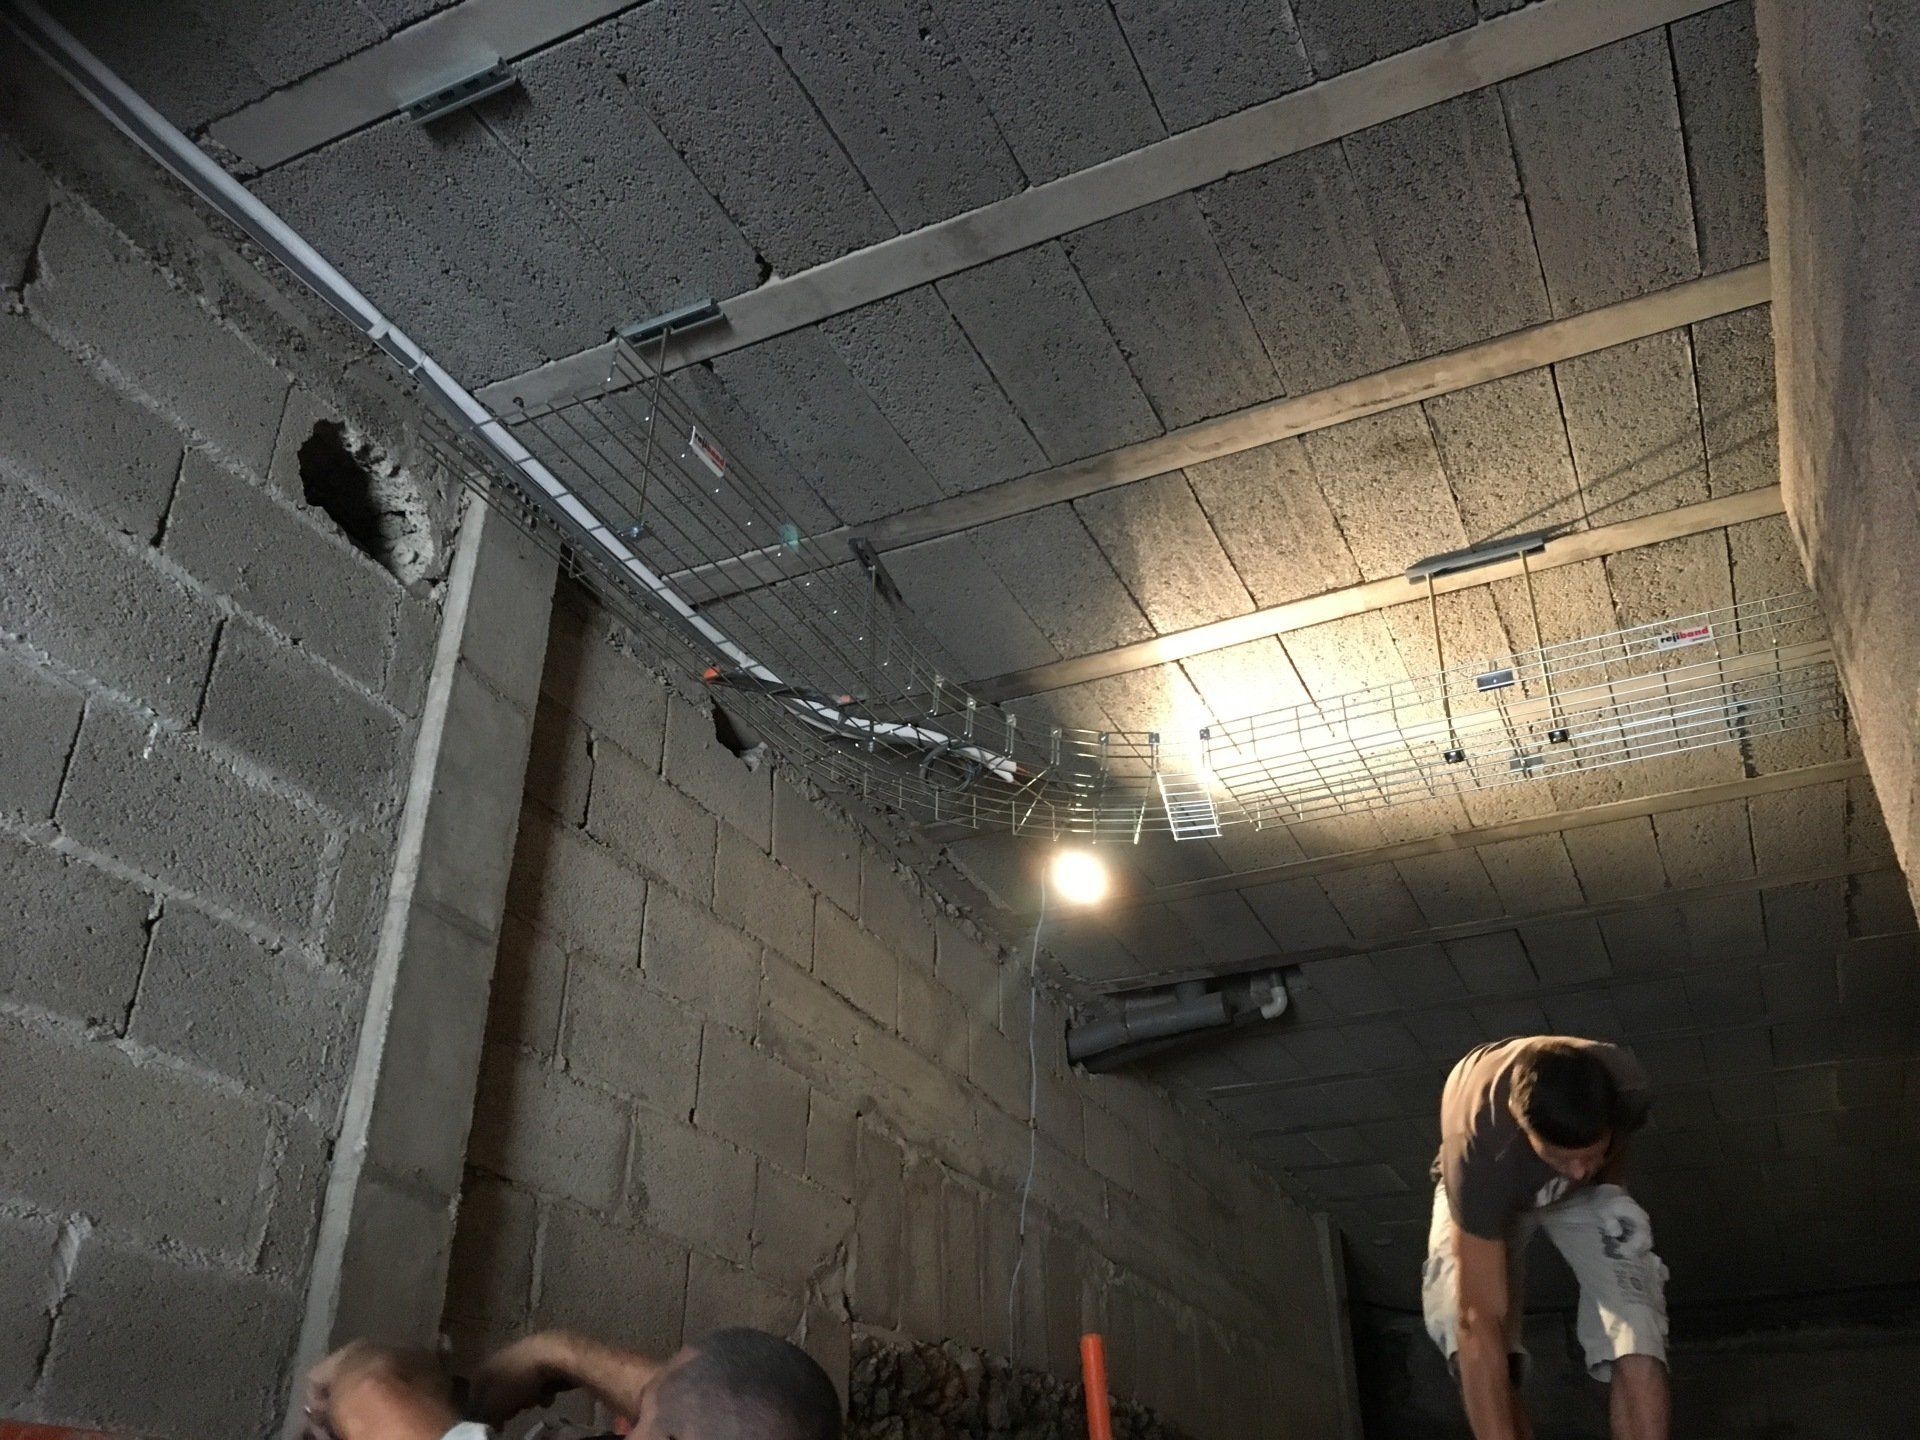 Photograph of workers installing basket tray on ceiling